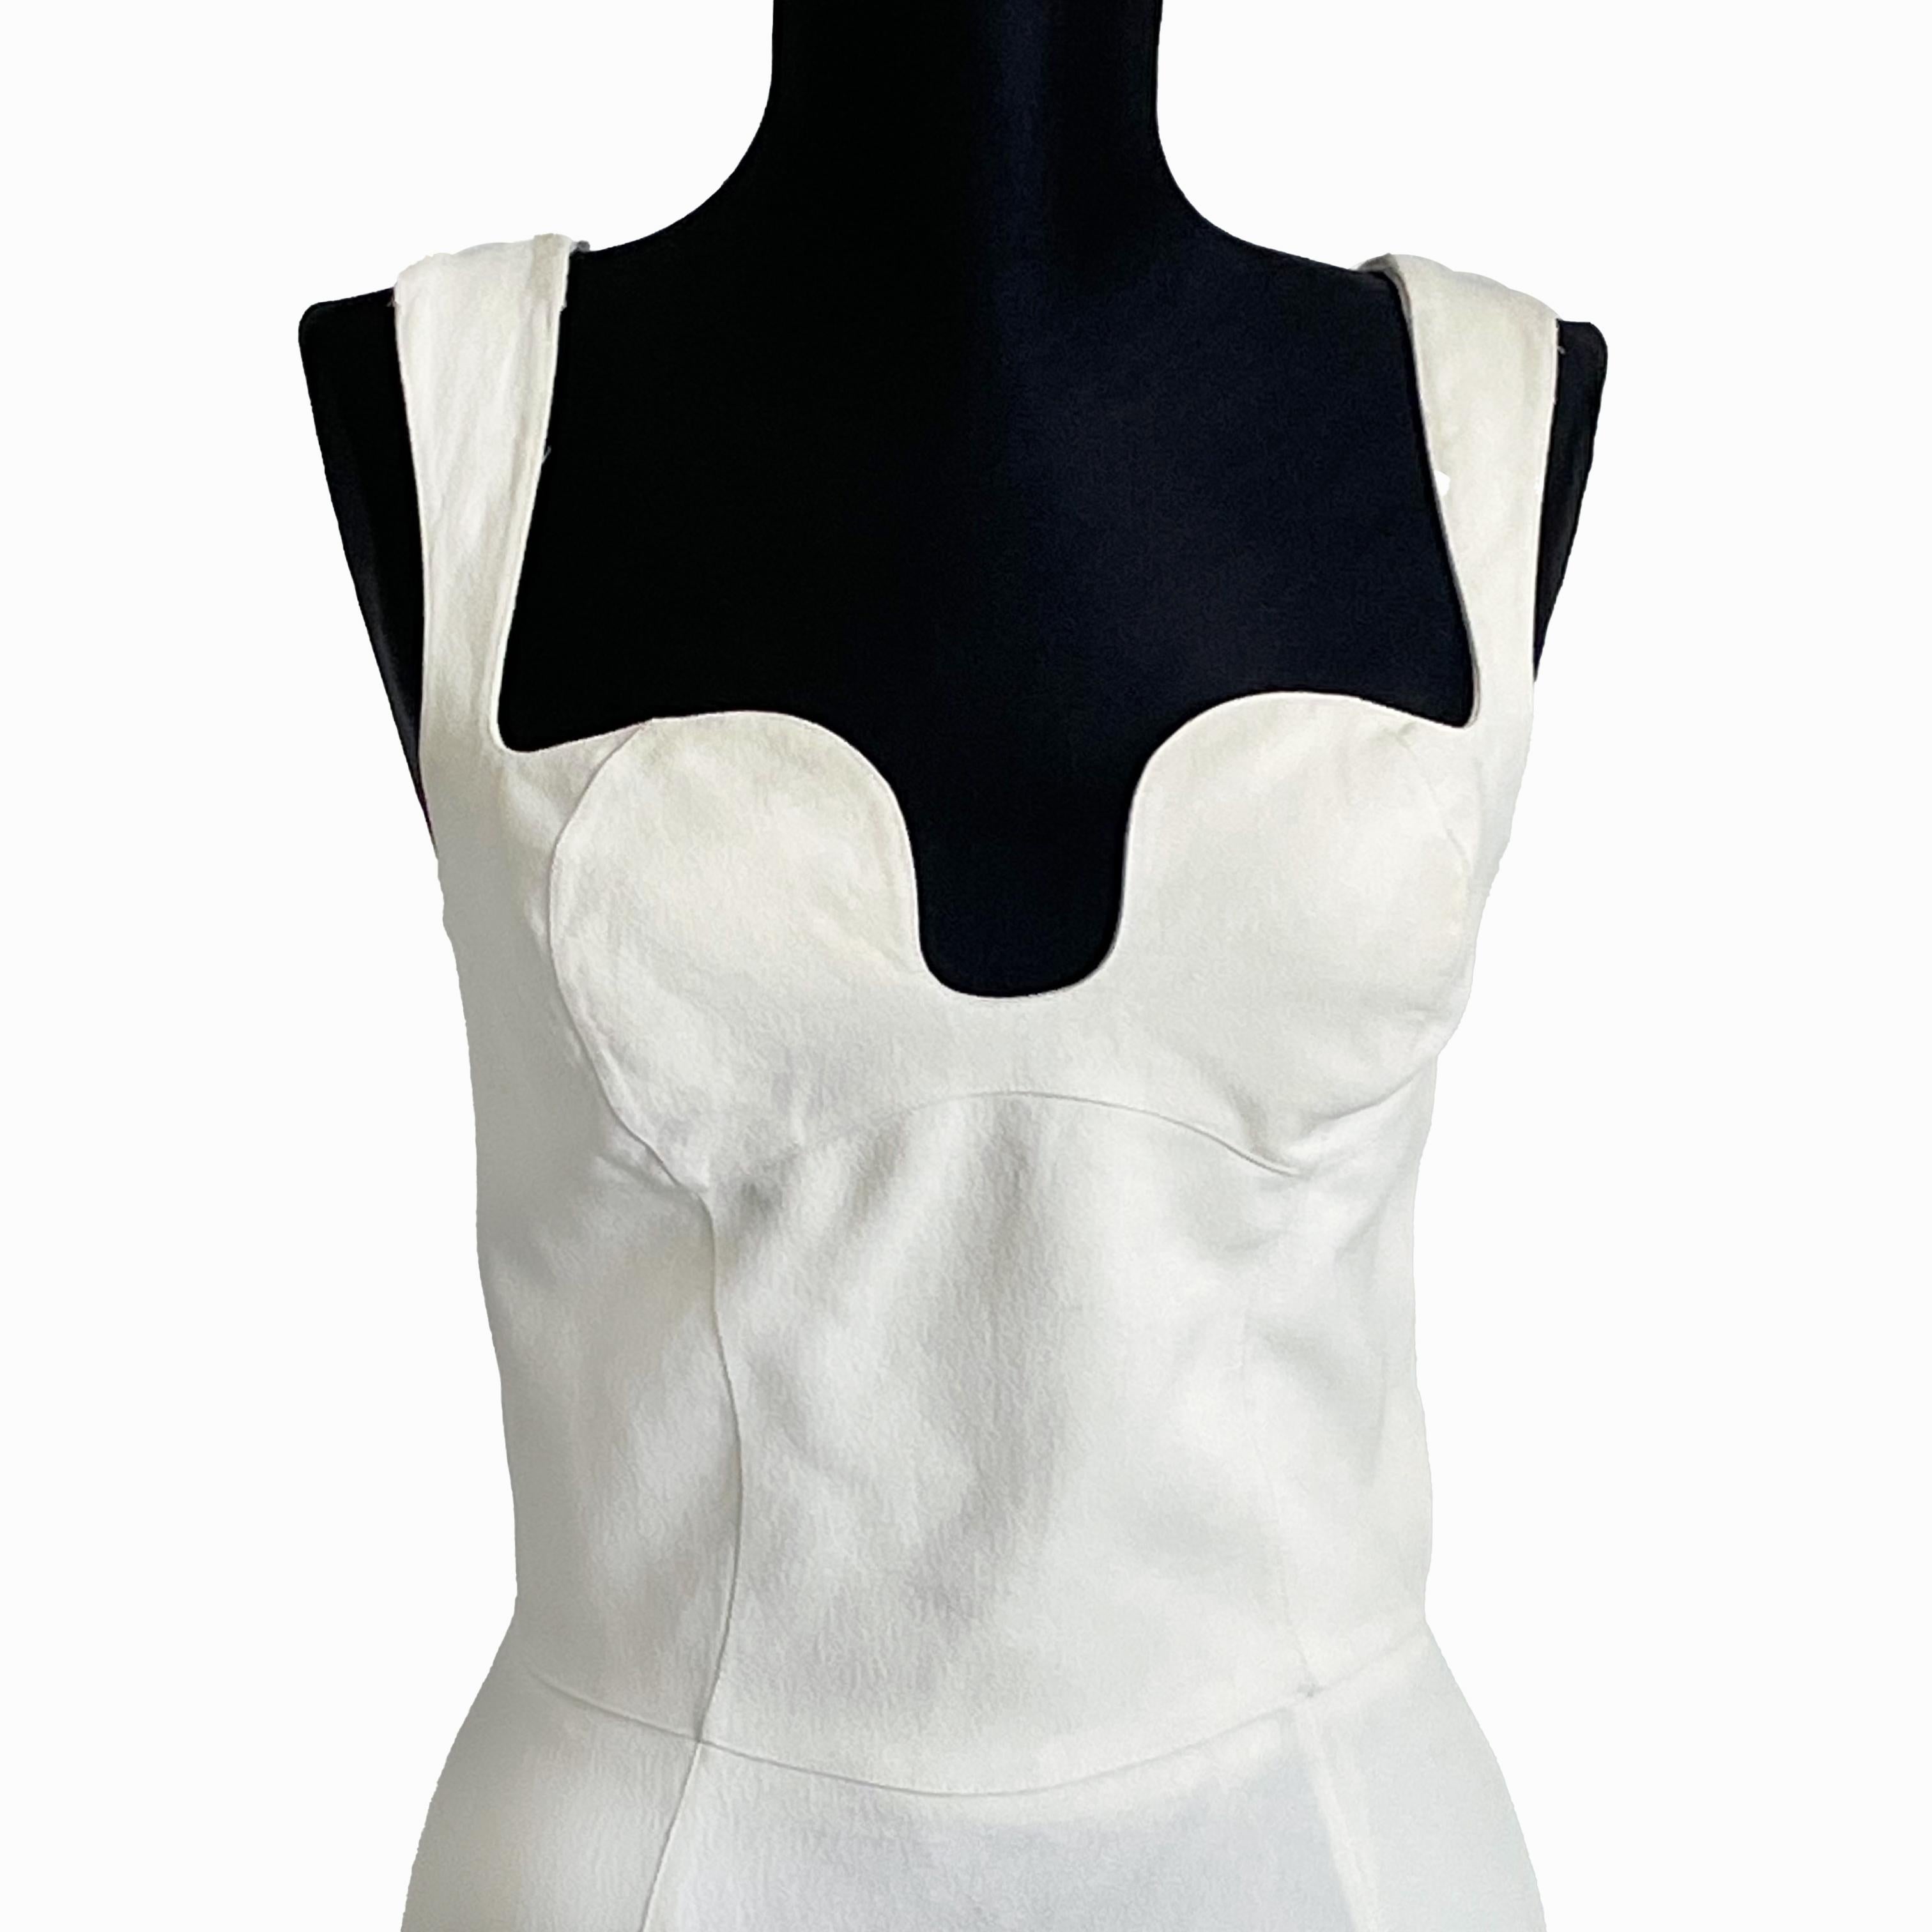 Thierry Mugler Cocktail Dress White Crepe Sculptural Chic Vintage 90s Sz 40 HTF For Sale 11